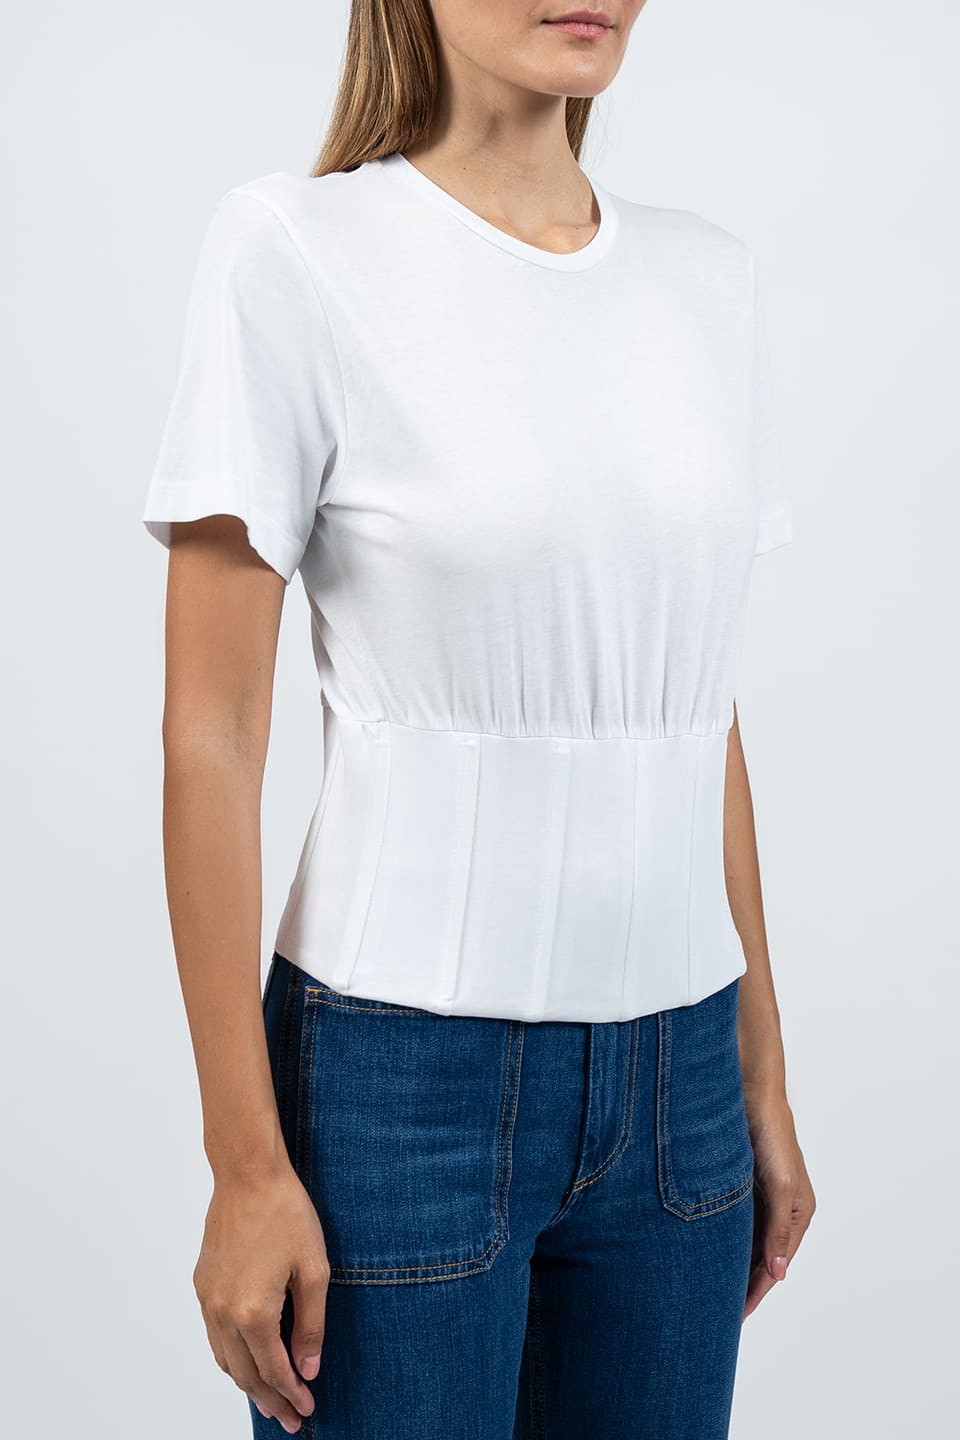 Designer White T-shirt, shop online with free delivery in UAE. Product gallery 4